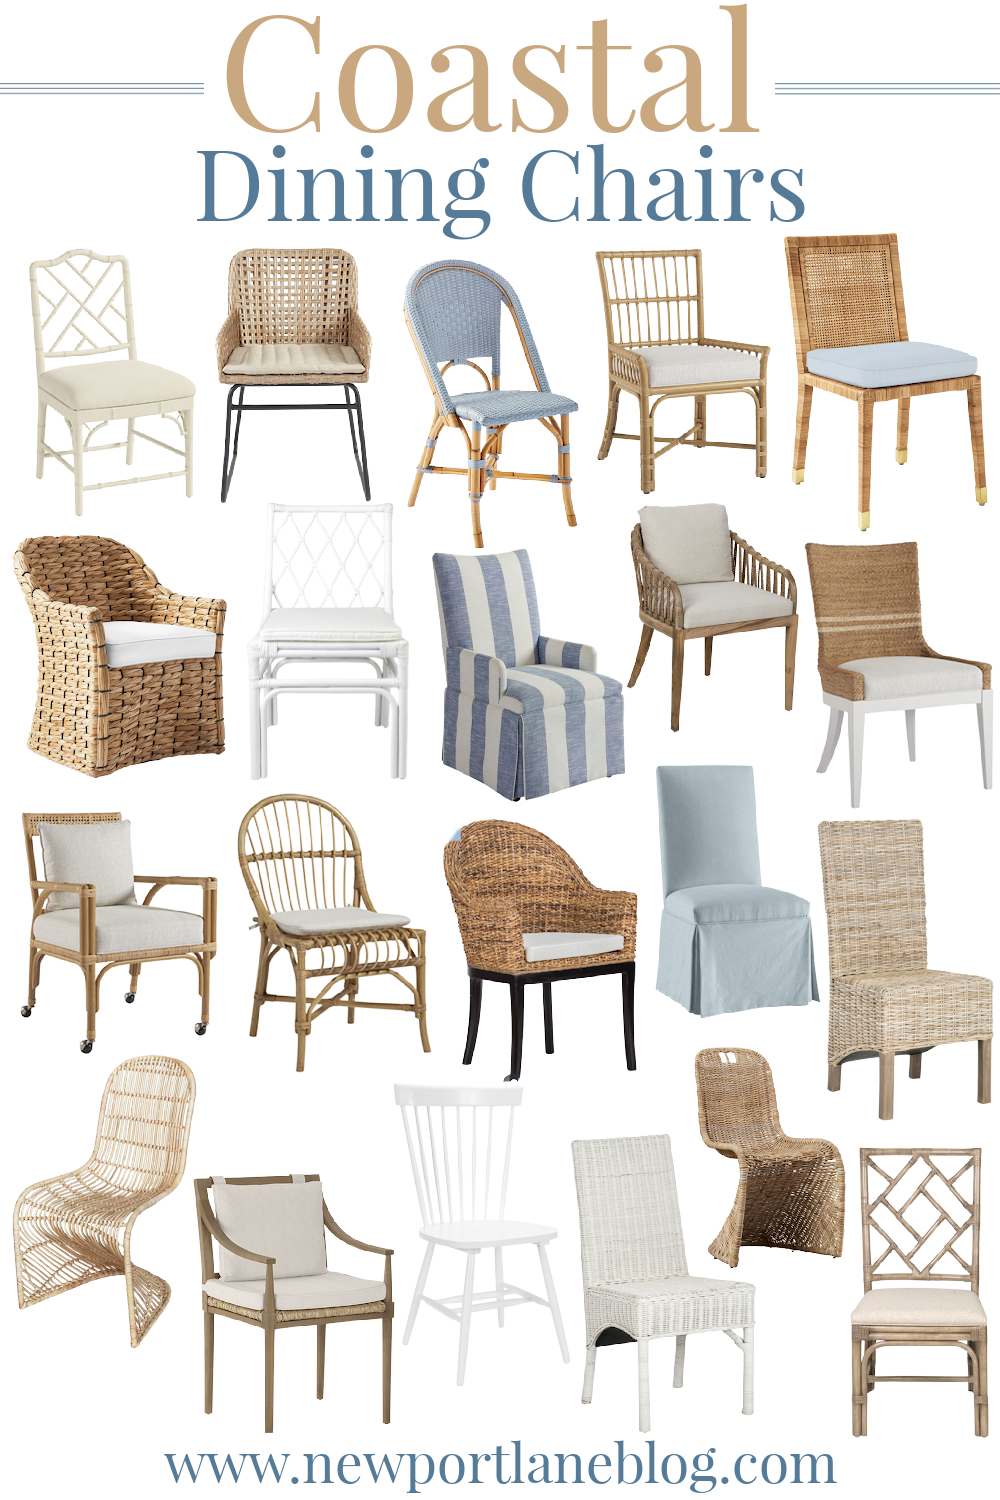 A roundup of the prettiest coastal dining chairs for every budget! #diningchairs #coastal #diningroom